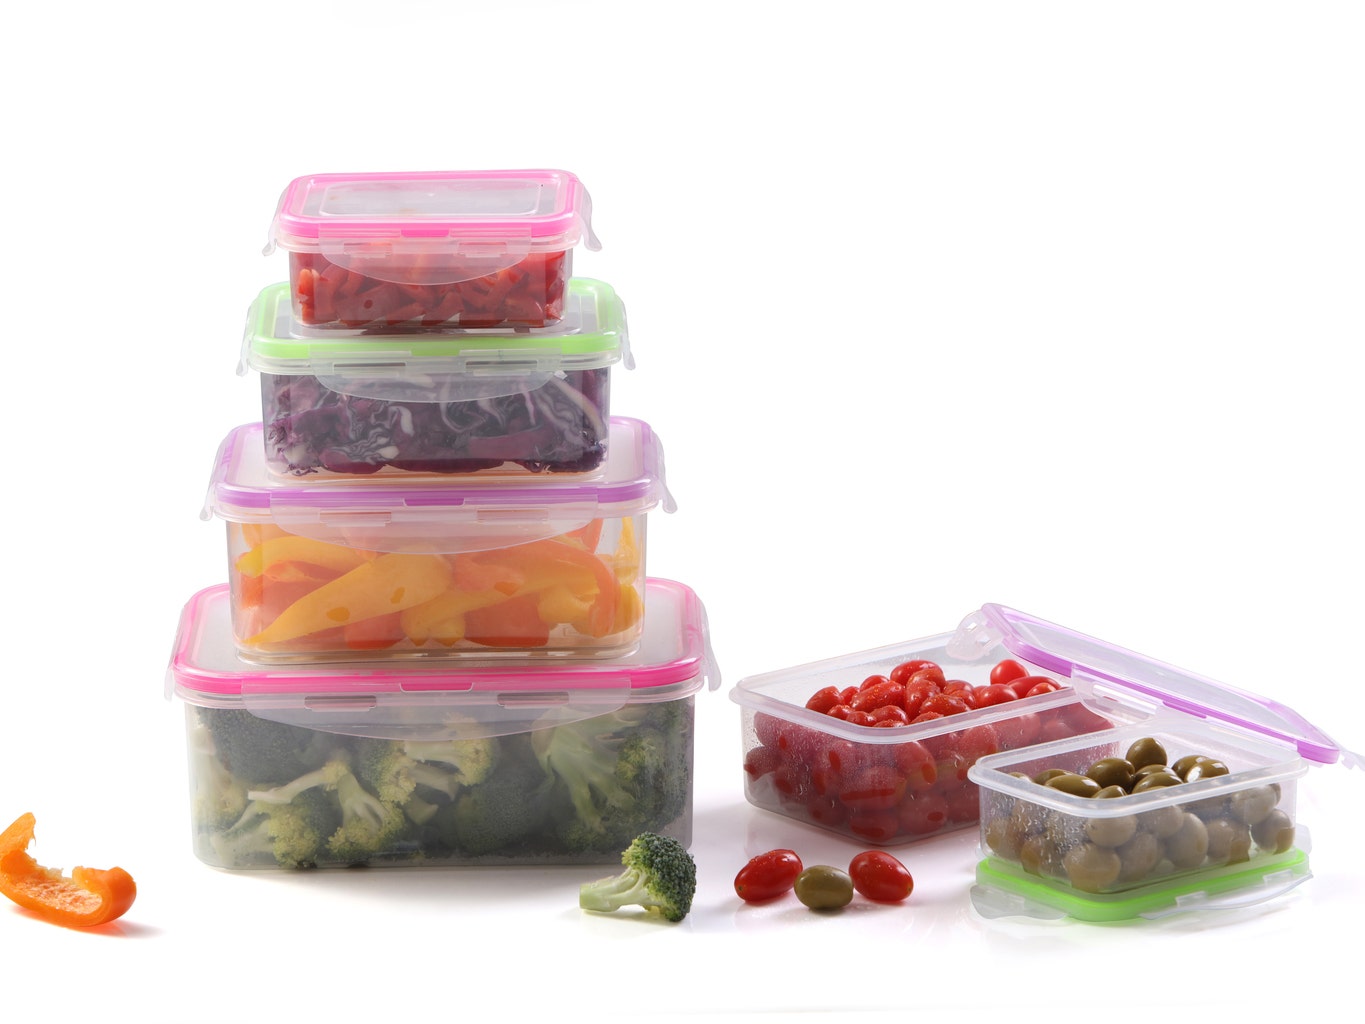 Iconic Kitchen Brand Tupperware Warns It May Not Survive 2023